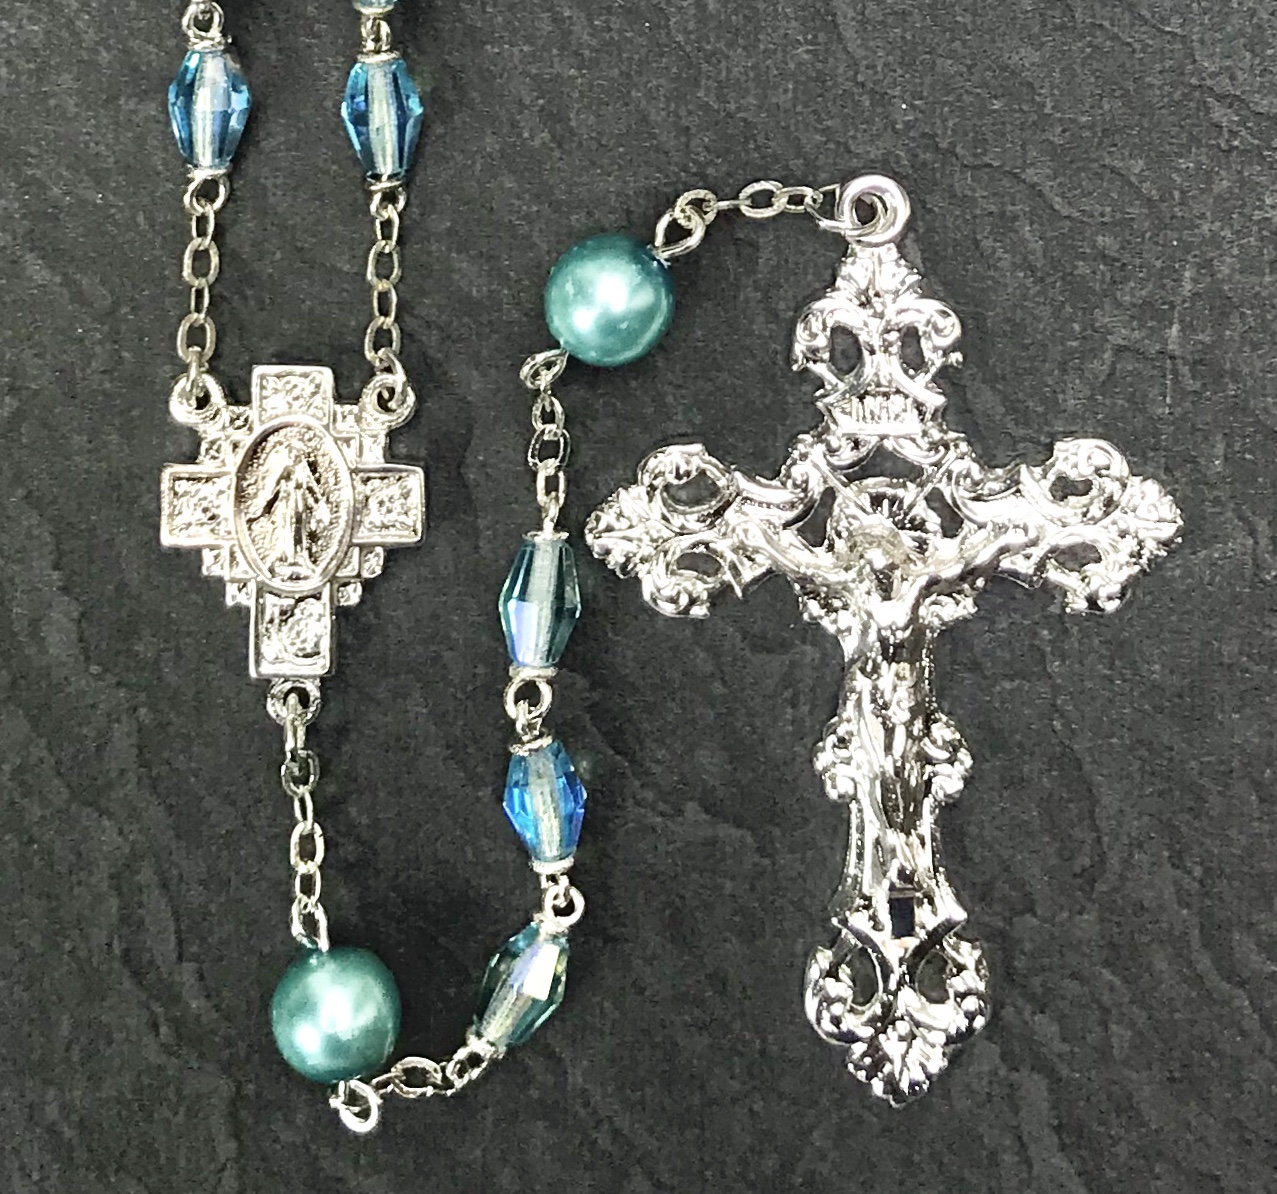 6x8mm AQUA LOC LINK WITH AQUA PEARL OUR FATHER BEADS STERLING SILVER PLATE ROSARY BOXED